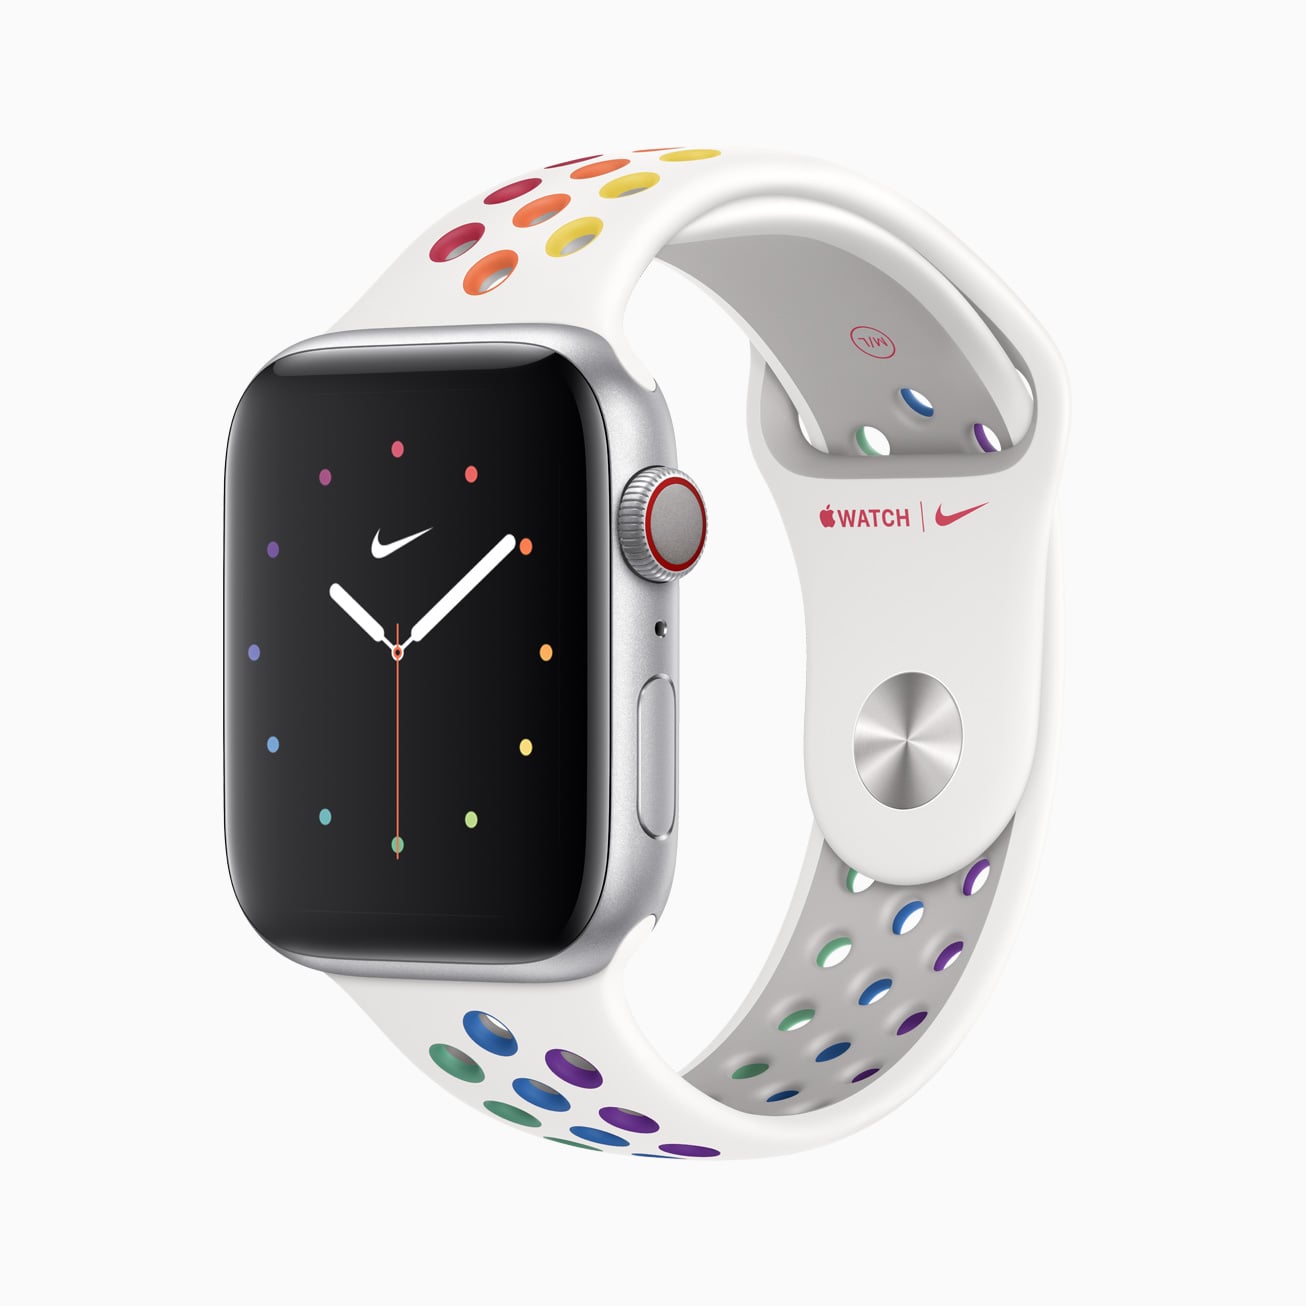 Apple Released 2 Pride Edition Sport Bands For Watch | POPSUGAR Tech